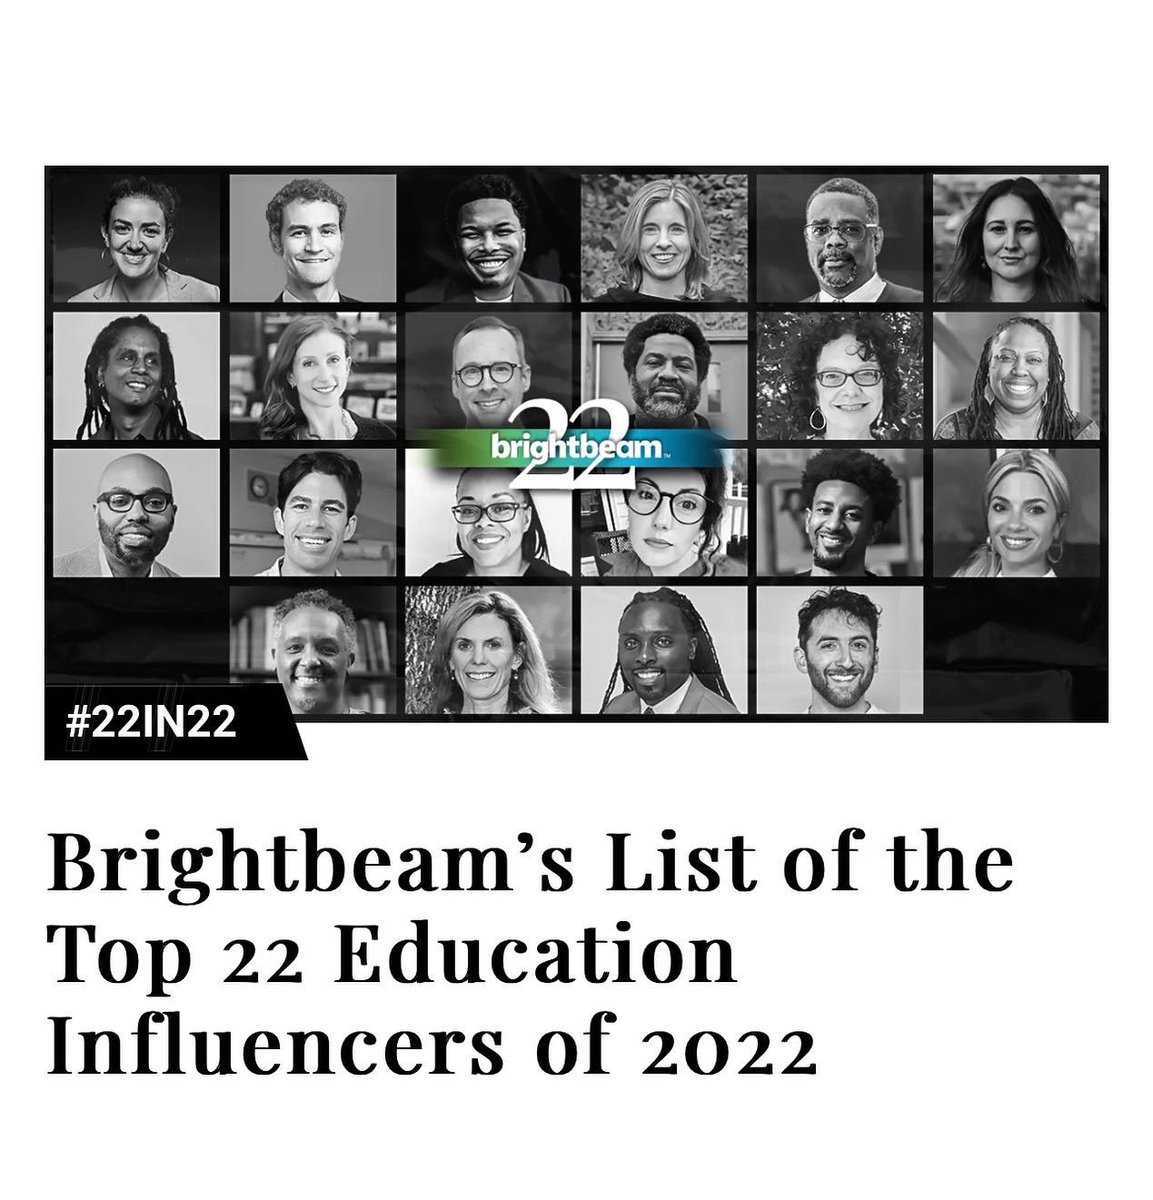 For the 2nd yr in a row, I’m honored to be recognized as a top @brightbeamntwk influencer. It’s even more special to share this honor w/ some of my favorite peeps in education @TWSteacher, @chrisemdin, @MrCrim3, @AfeniMills & @selmekki!

Thank you @brightbeamntwk! 🙏🏿💪🏿

#22IN22